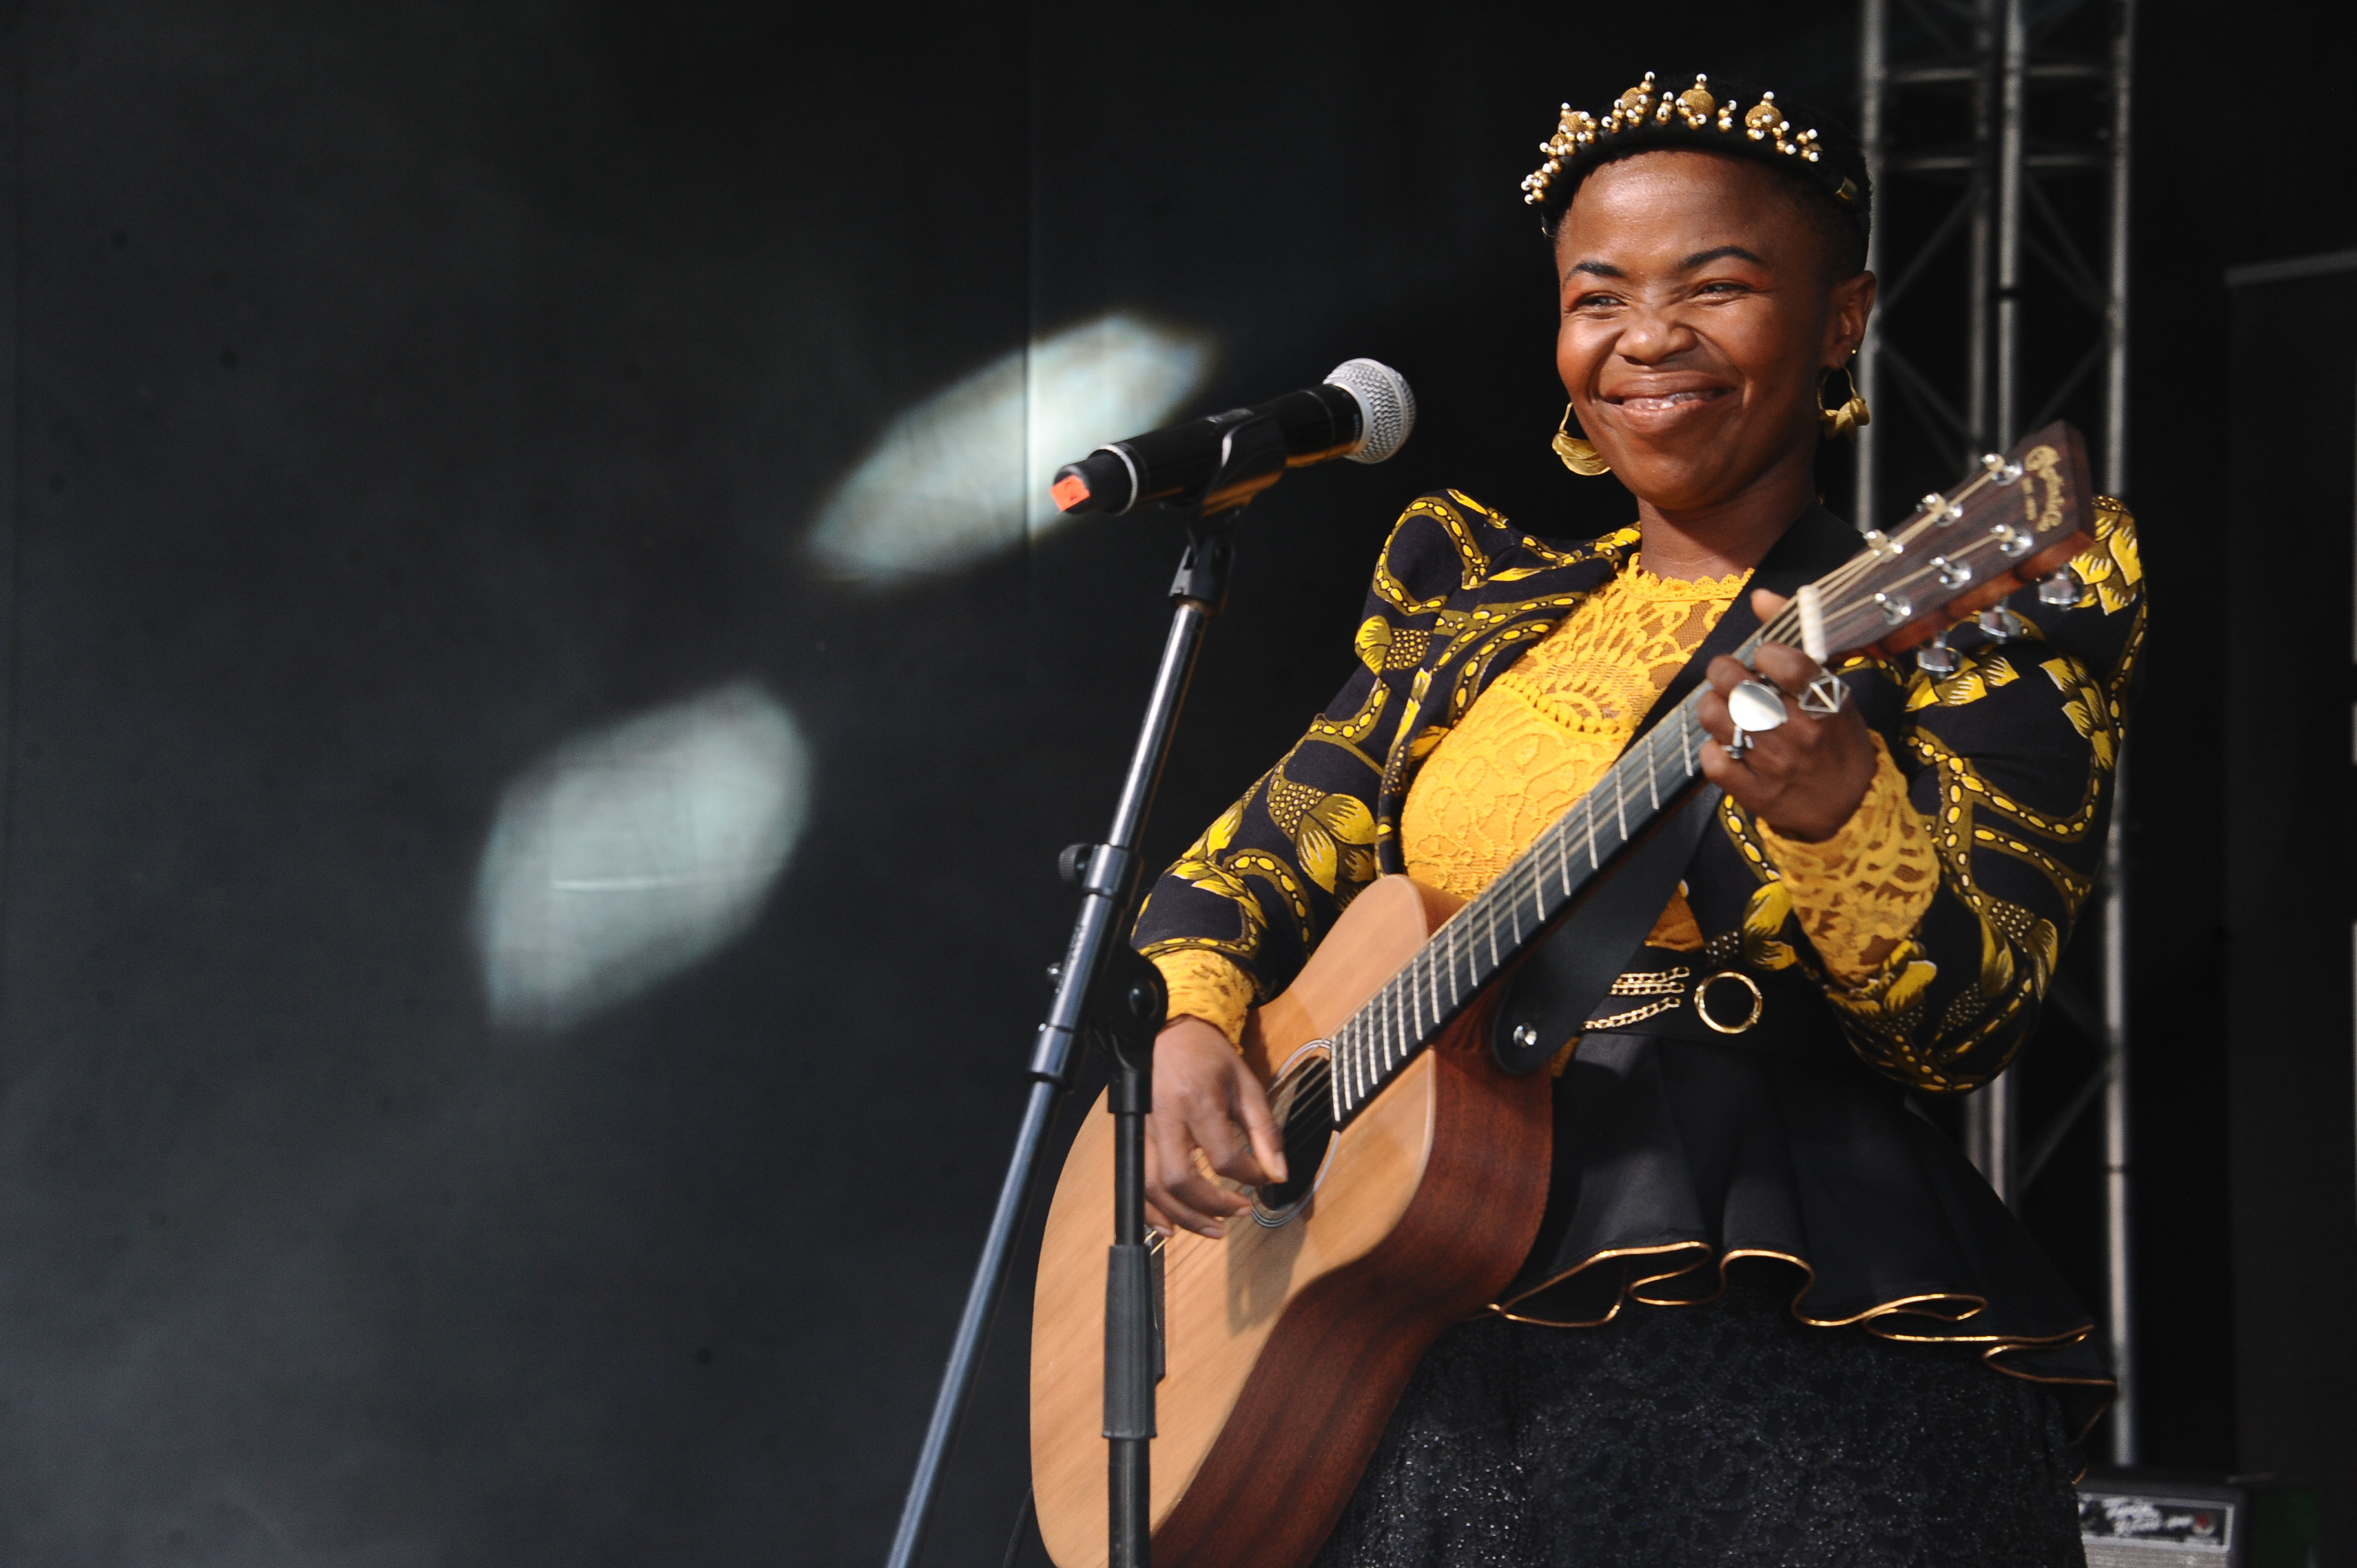 JOHANNESBURG, SOUTH AFRICA - AUGUST 27: Zolani Mahola during the AMPD icons with Yvonne Chaka Chaka and Zolani Mahola at the AMPD studios, Newtown Junction on August 27, 2019 in Johannesburg, South Africa. The latest AMPD icons conversation series, dubbed; #TheTimeIsNow saw Chaka Chaka and Mahola share their journeys to success and how they remain powered by their talent and smart financial planning. (Photo by Gallo Images/Oupa Bopape)